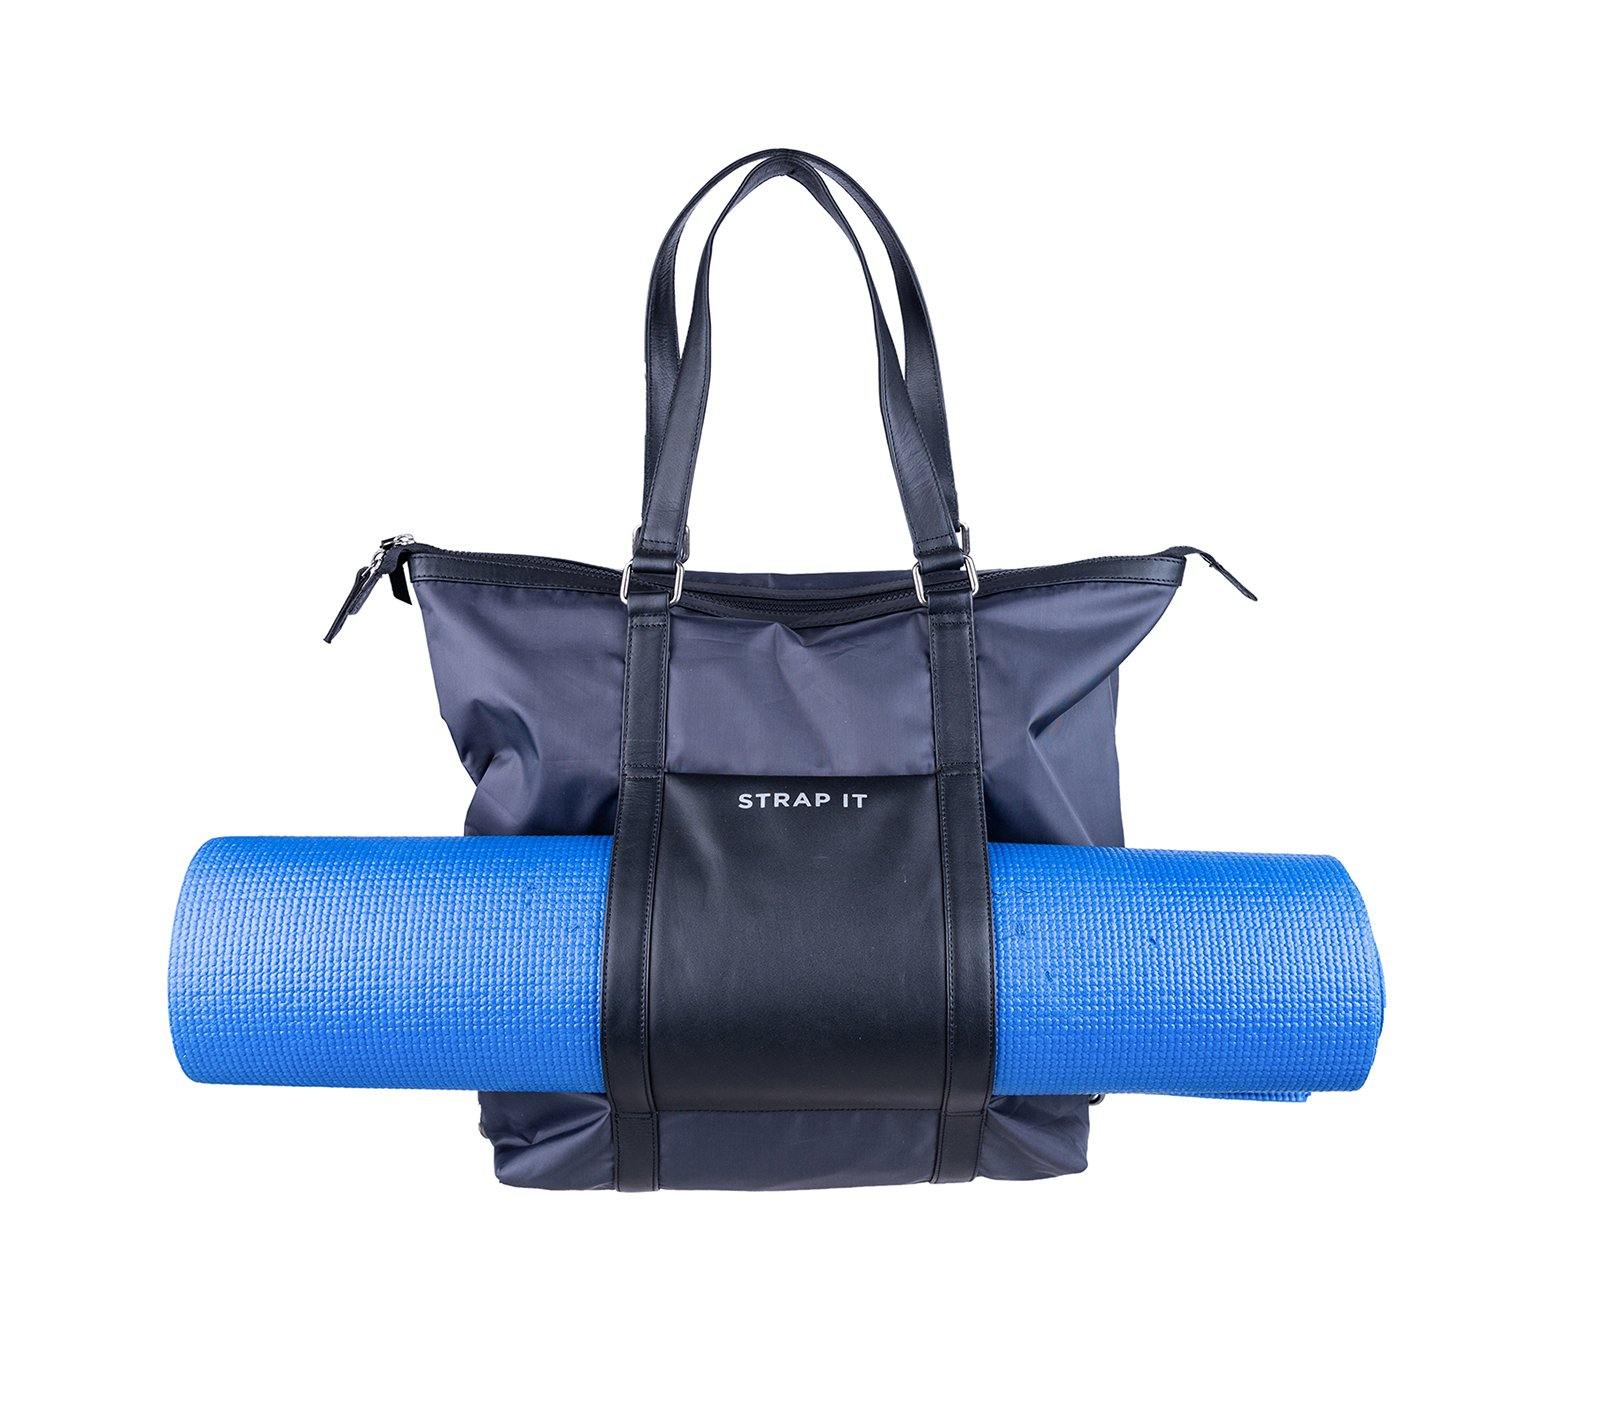 Large Yoga Mat Backpack Carrier Bag for Women Girls with Straps